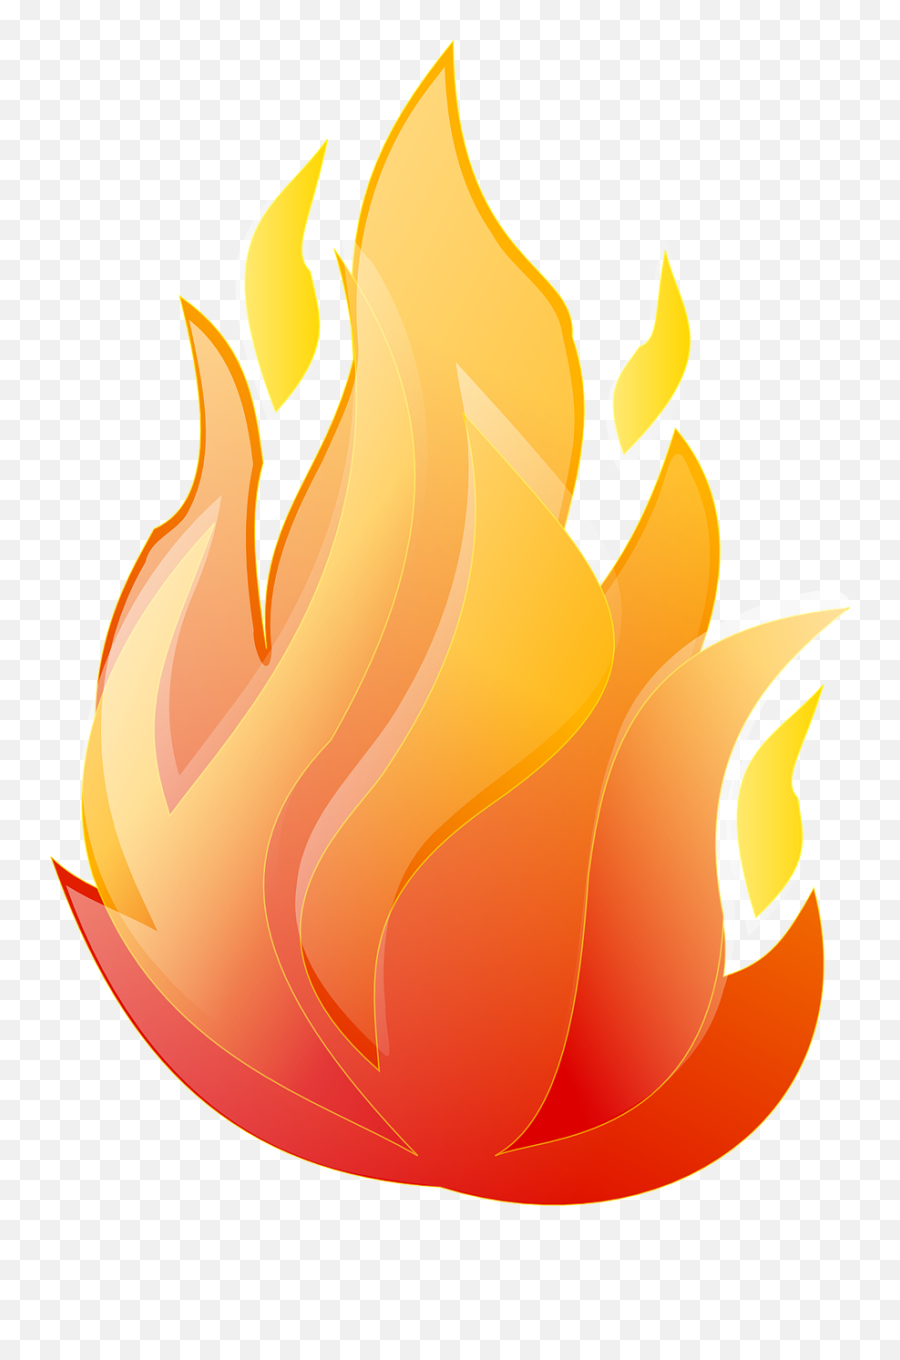 Free Fire Png Vector Download - Animated Transparent Background Fire,Fire  Vector Png - free transparent png images 